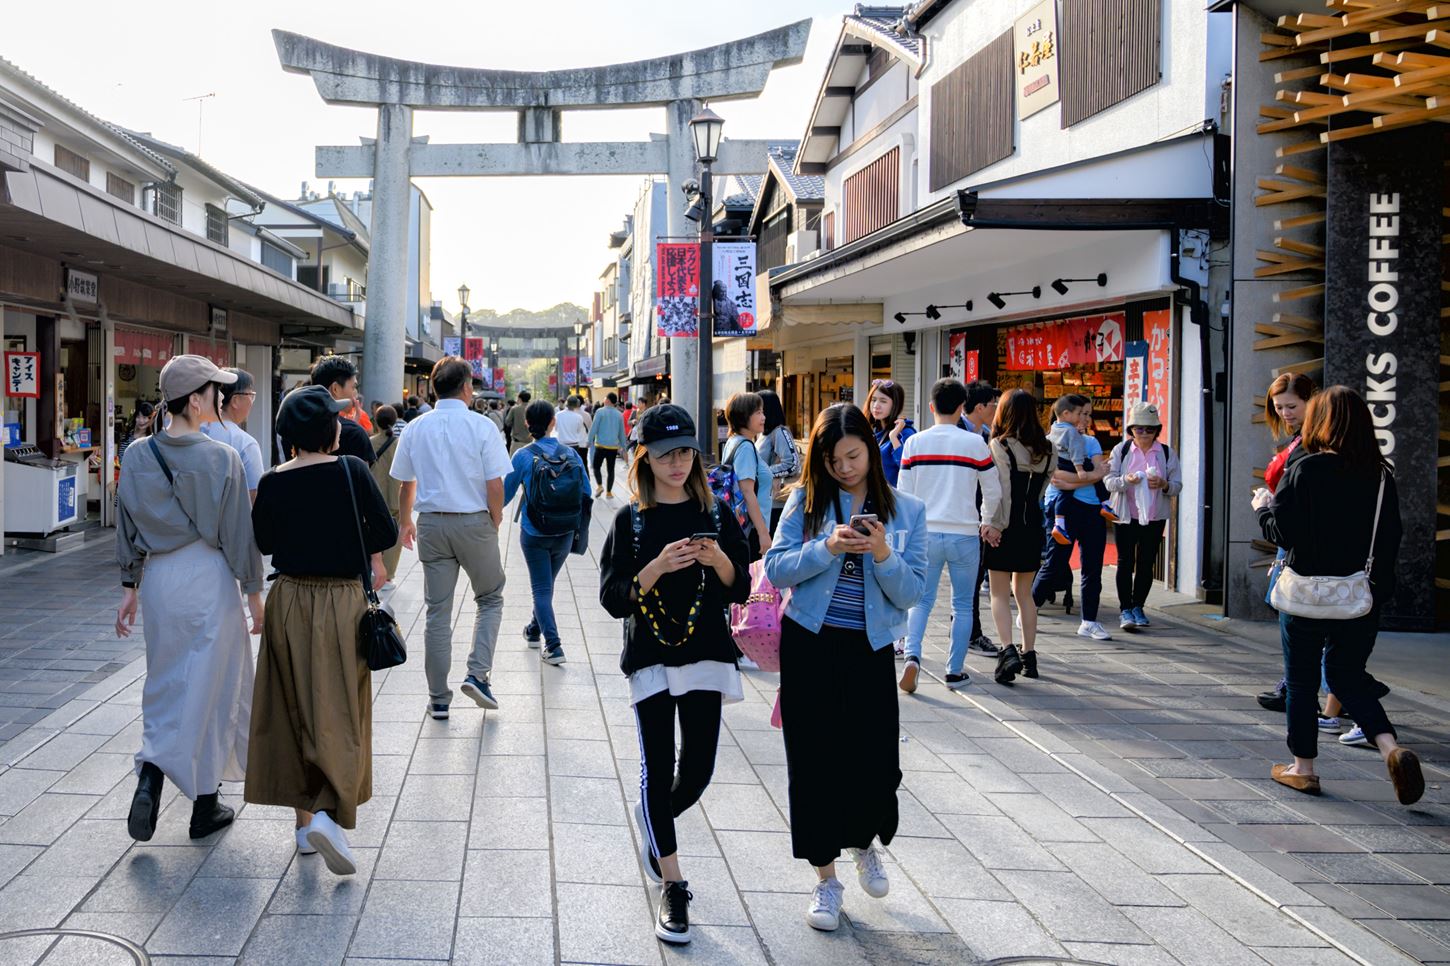 Sightseeing scenery that simply shows the weather and clothes in Fukuoka in October3